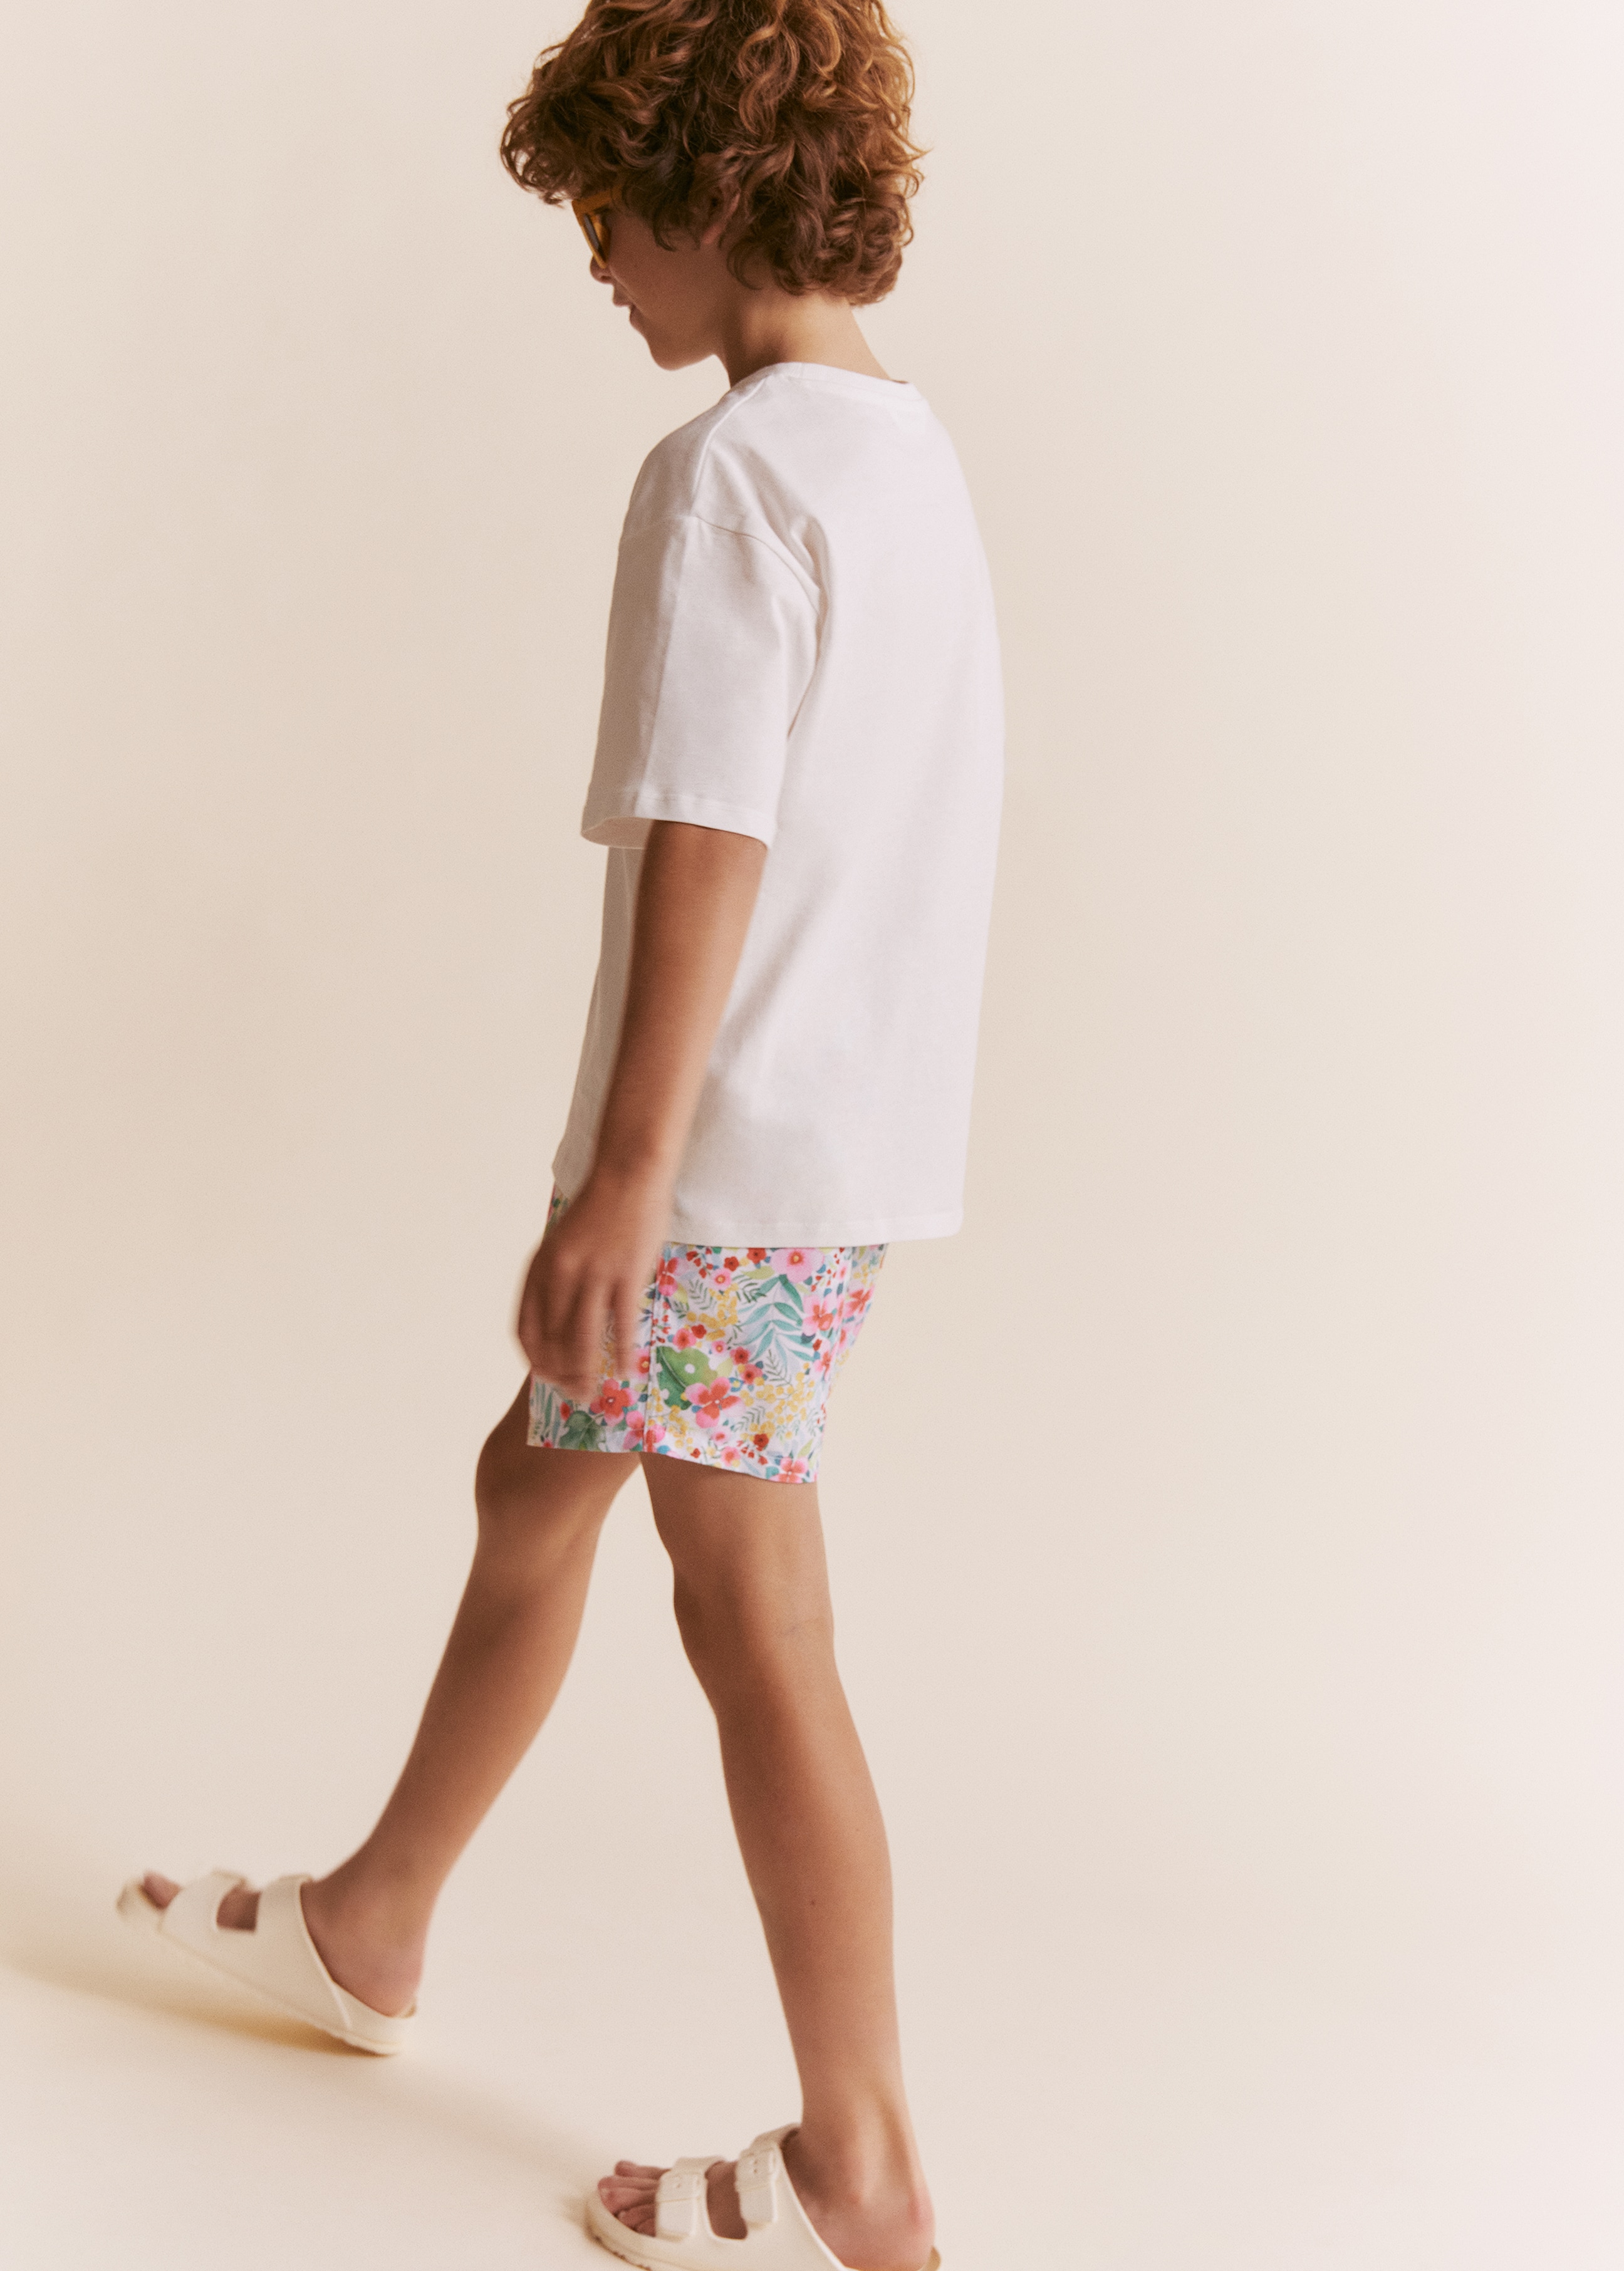 Floral-print swimming trunks - Details of the article 1